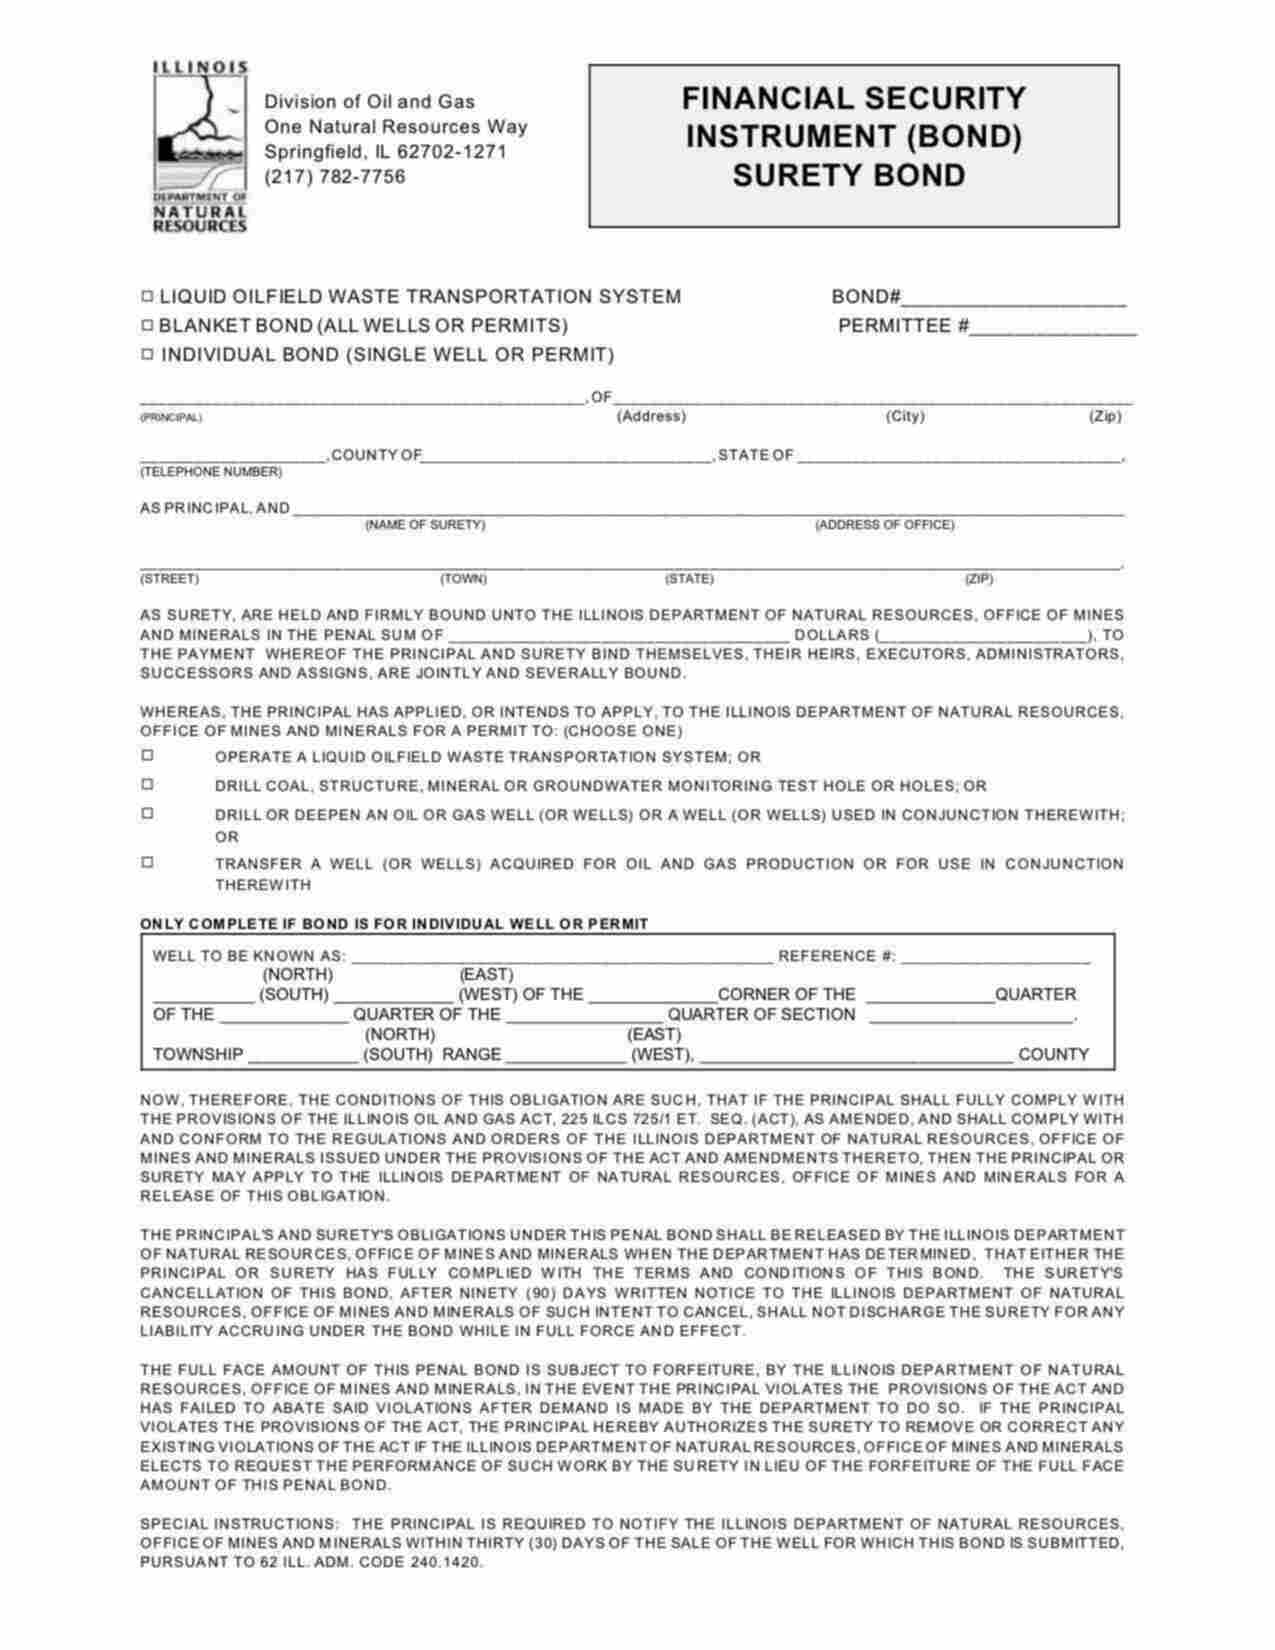 Illinois Blanket Coal, Structure or Groundwater Drilling Holes Bond Form